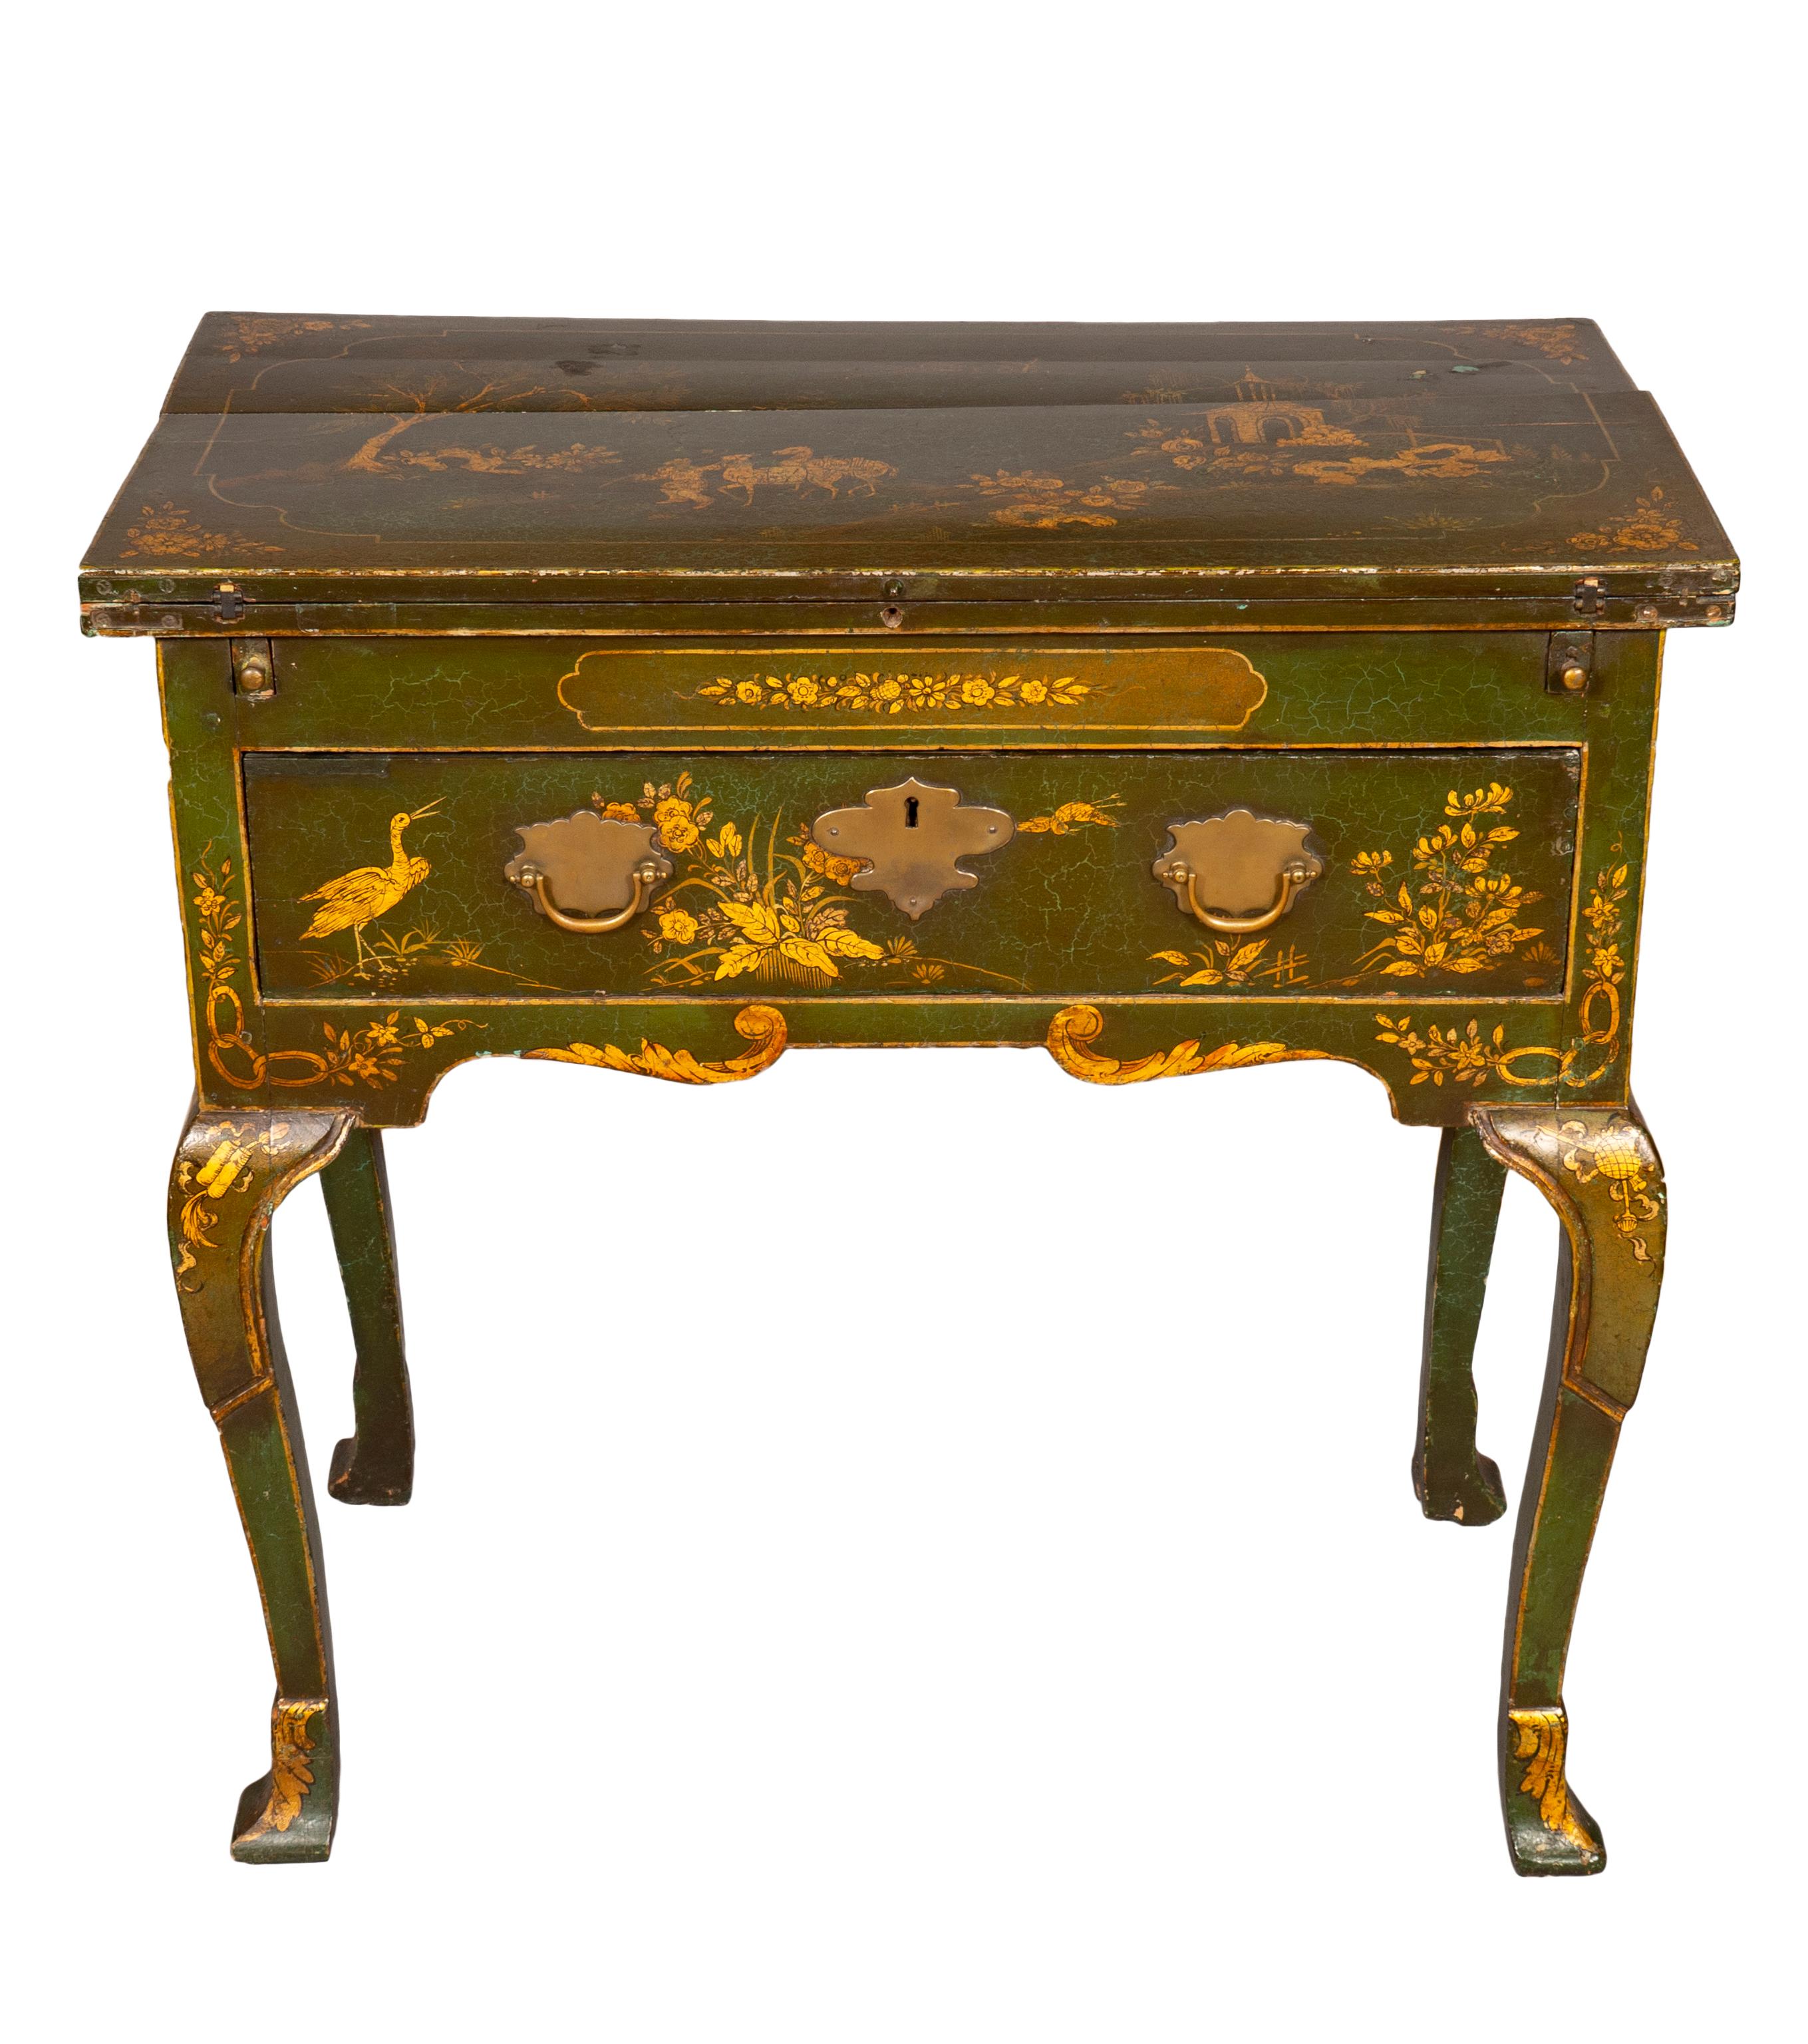 With possible later painted decoration. With a great look and nice appearance.
The rectangular top with a fold over top to form a writing surface over a frieze with a single drawer, raised on cabriole legs and trifid feet. From a Newport RI Estate.